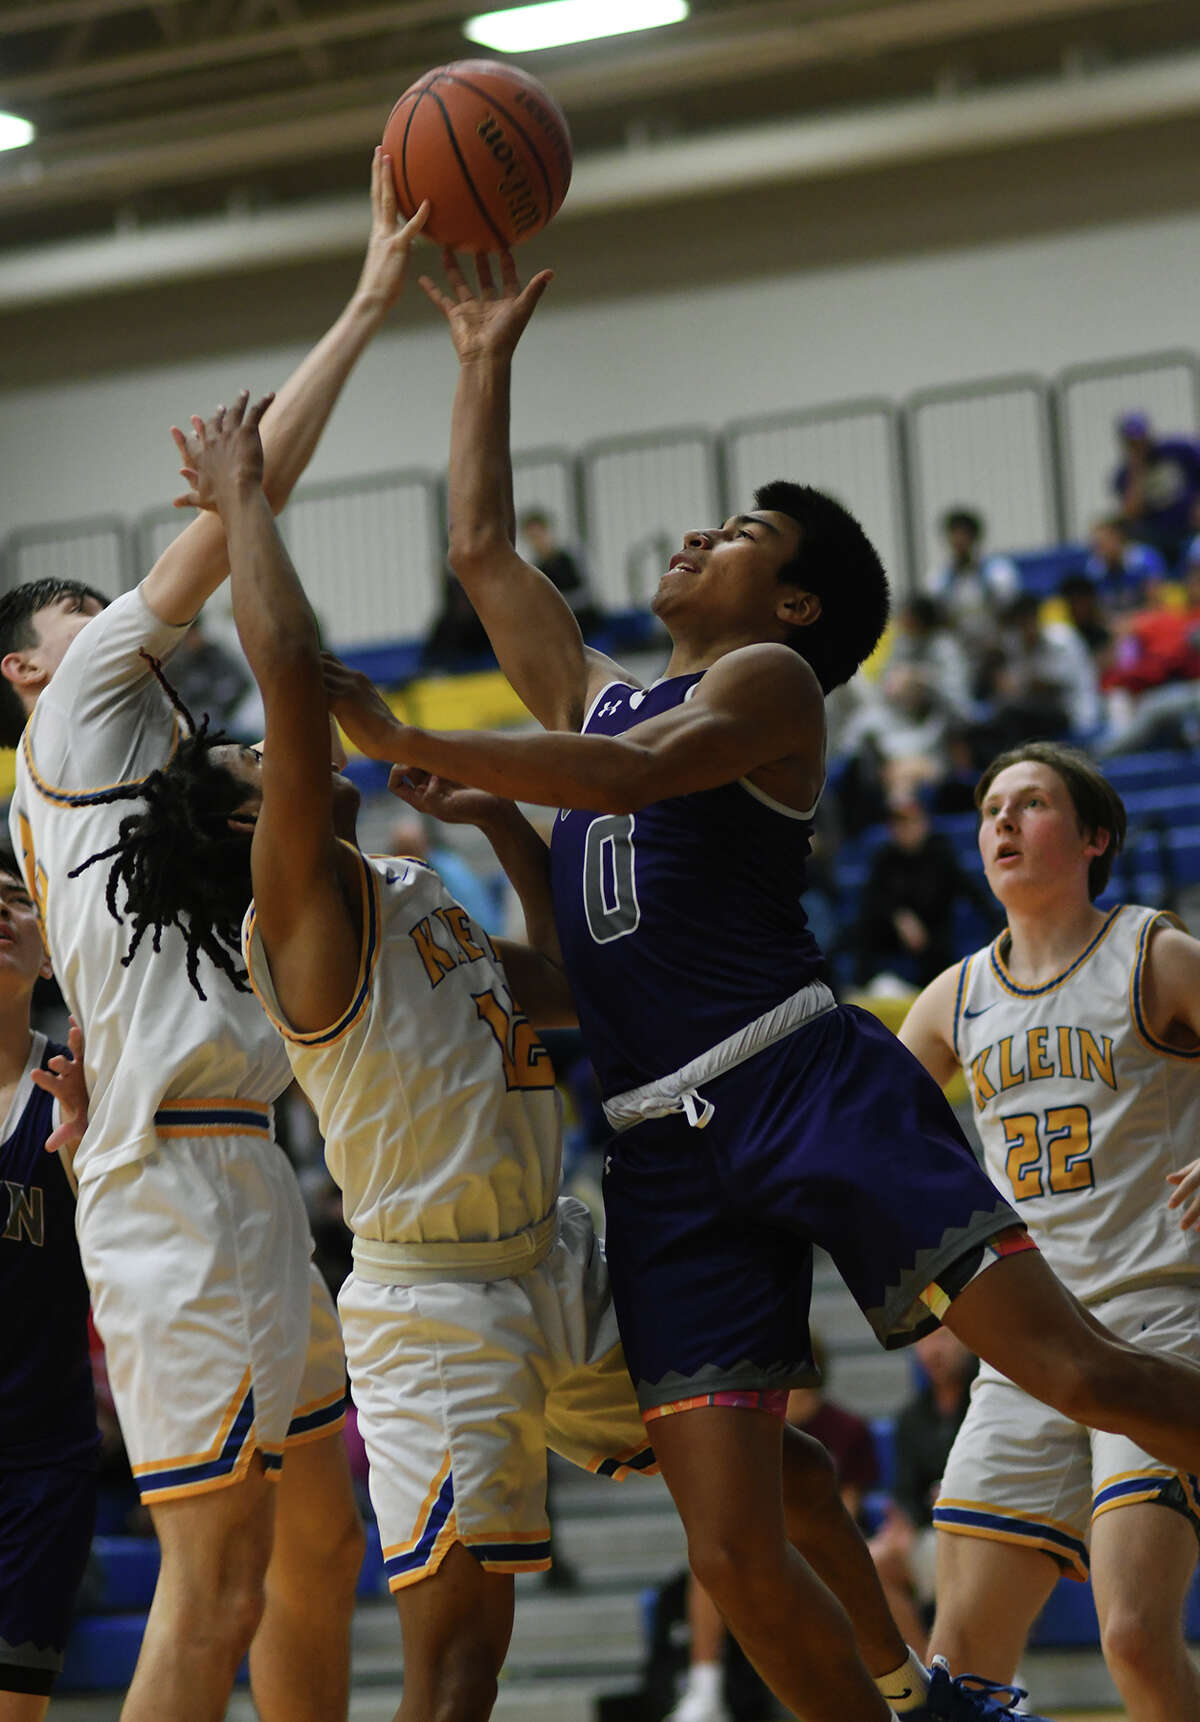 Klein Cain senior guard Emmanuel Sosa (0) finds his path to the basket blocked by the taandem of Klein defenders Aaron Martin (12) and Landon Louis, left, both seniors, during the third quarter of their District 15-6A matchup at Klein High School on Jan. 21, 2023.